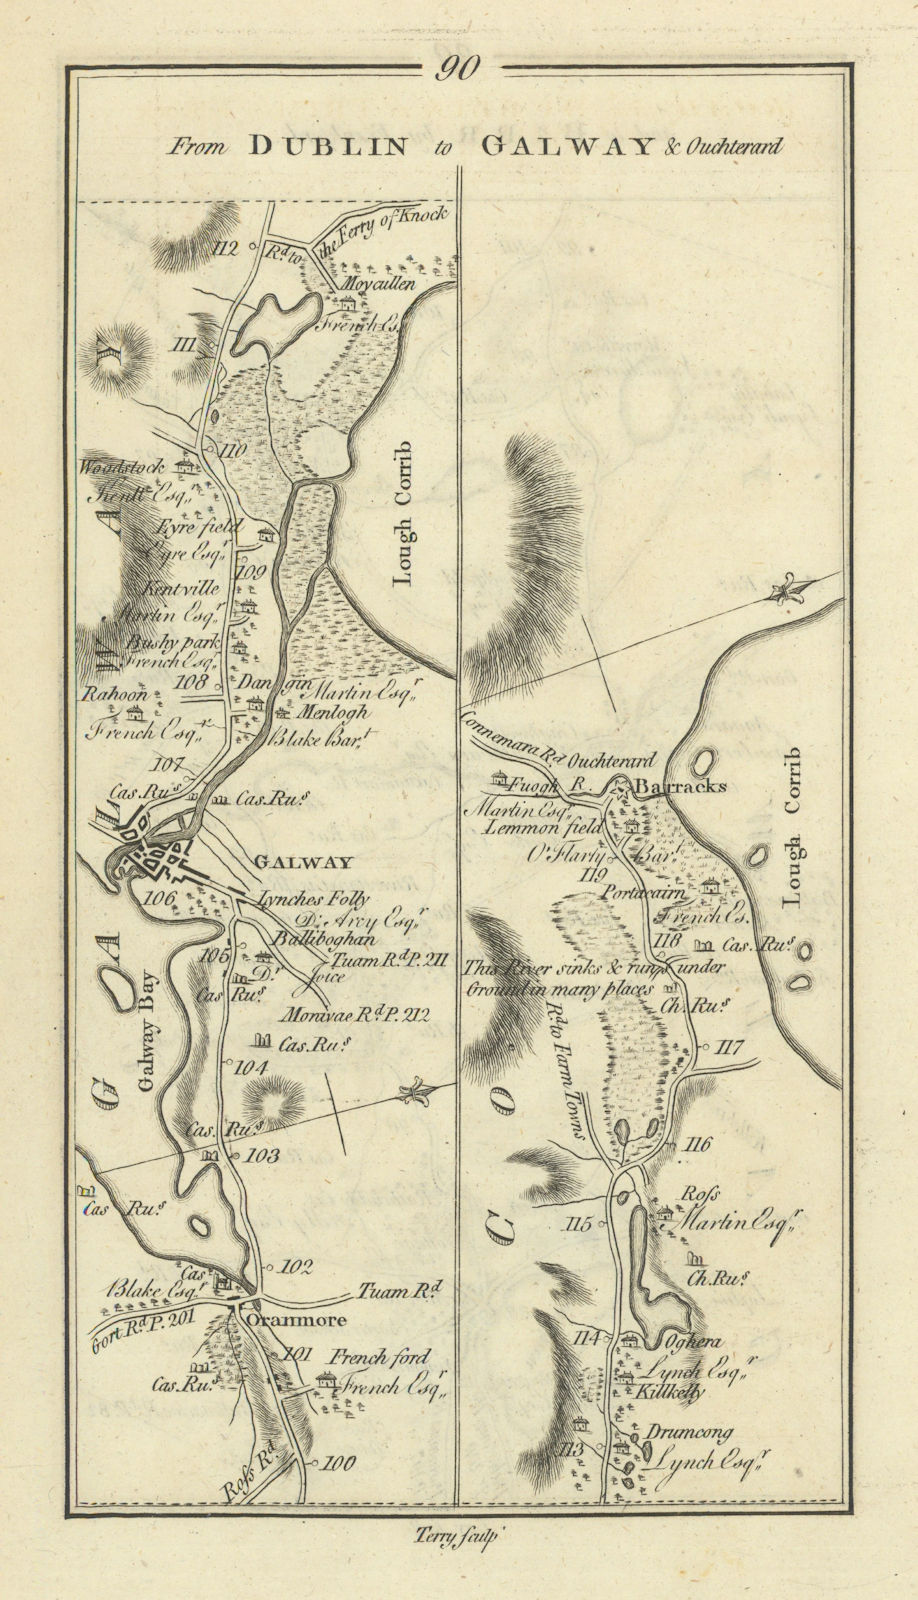 Associate Product #90 Dublin to Galway & Ouchterard. Oranmore Moycullen. TAYLOR/SKINNER 1778 map